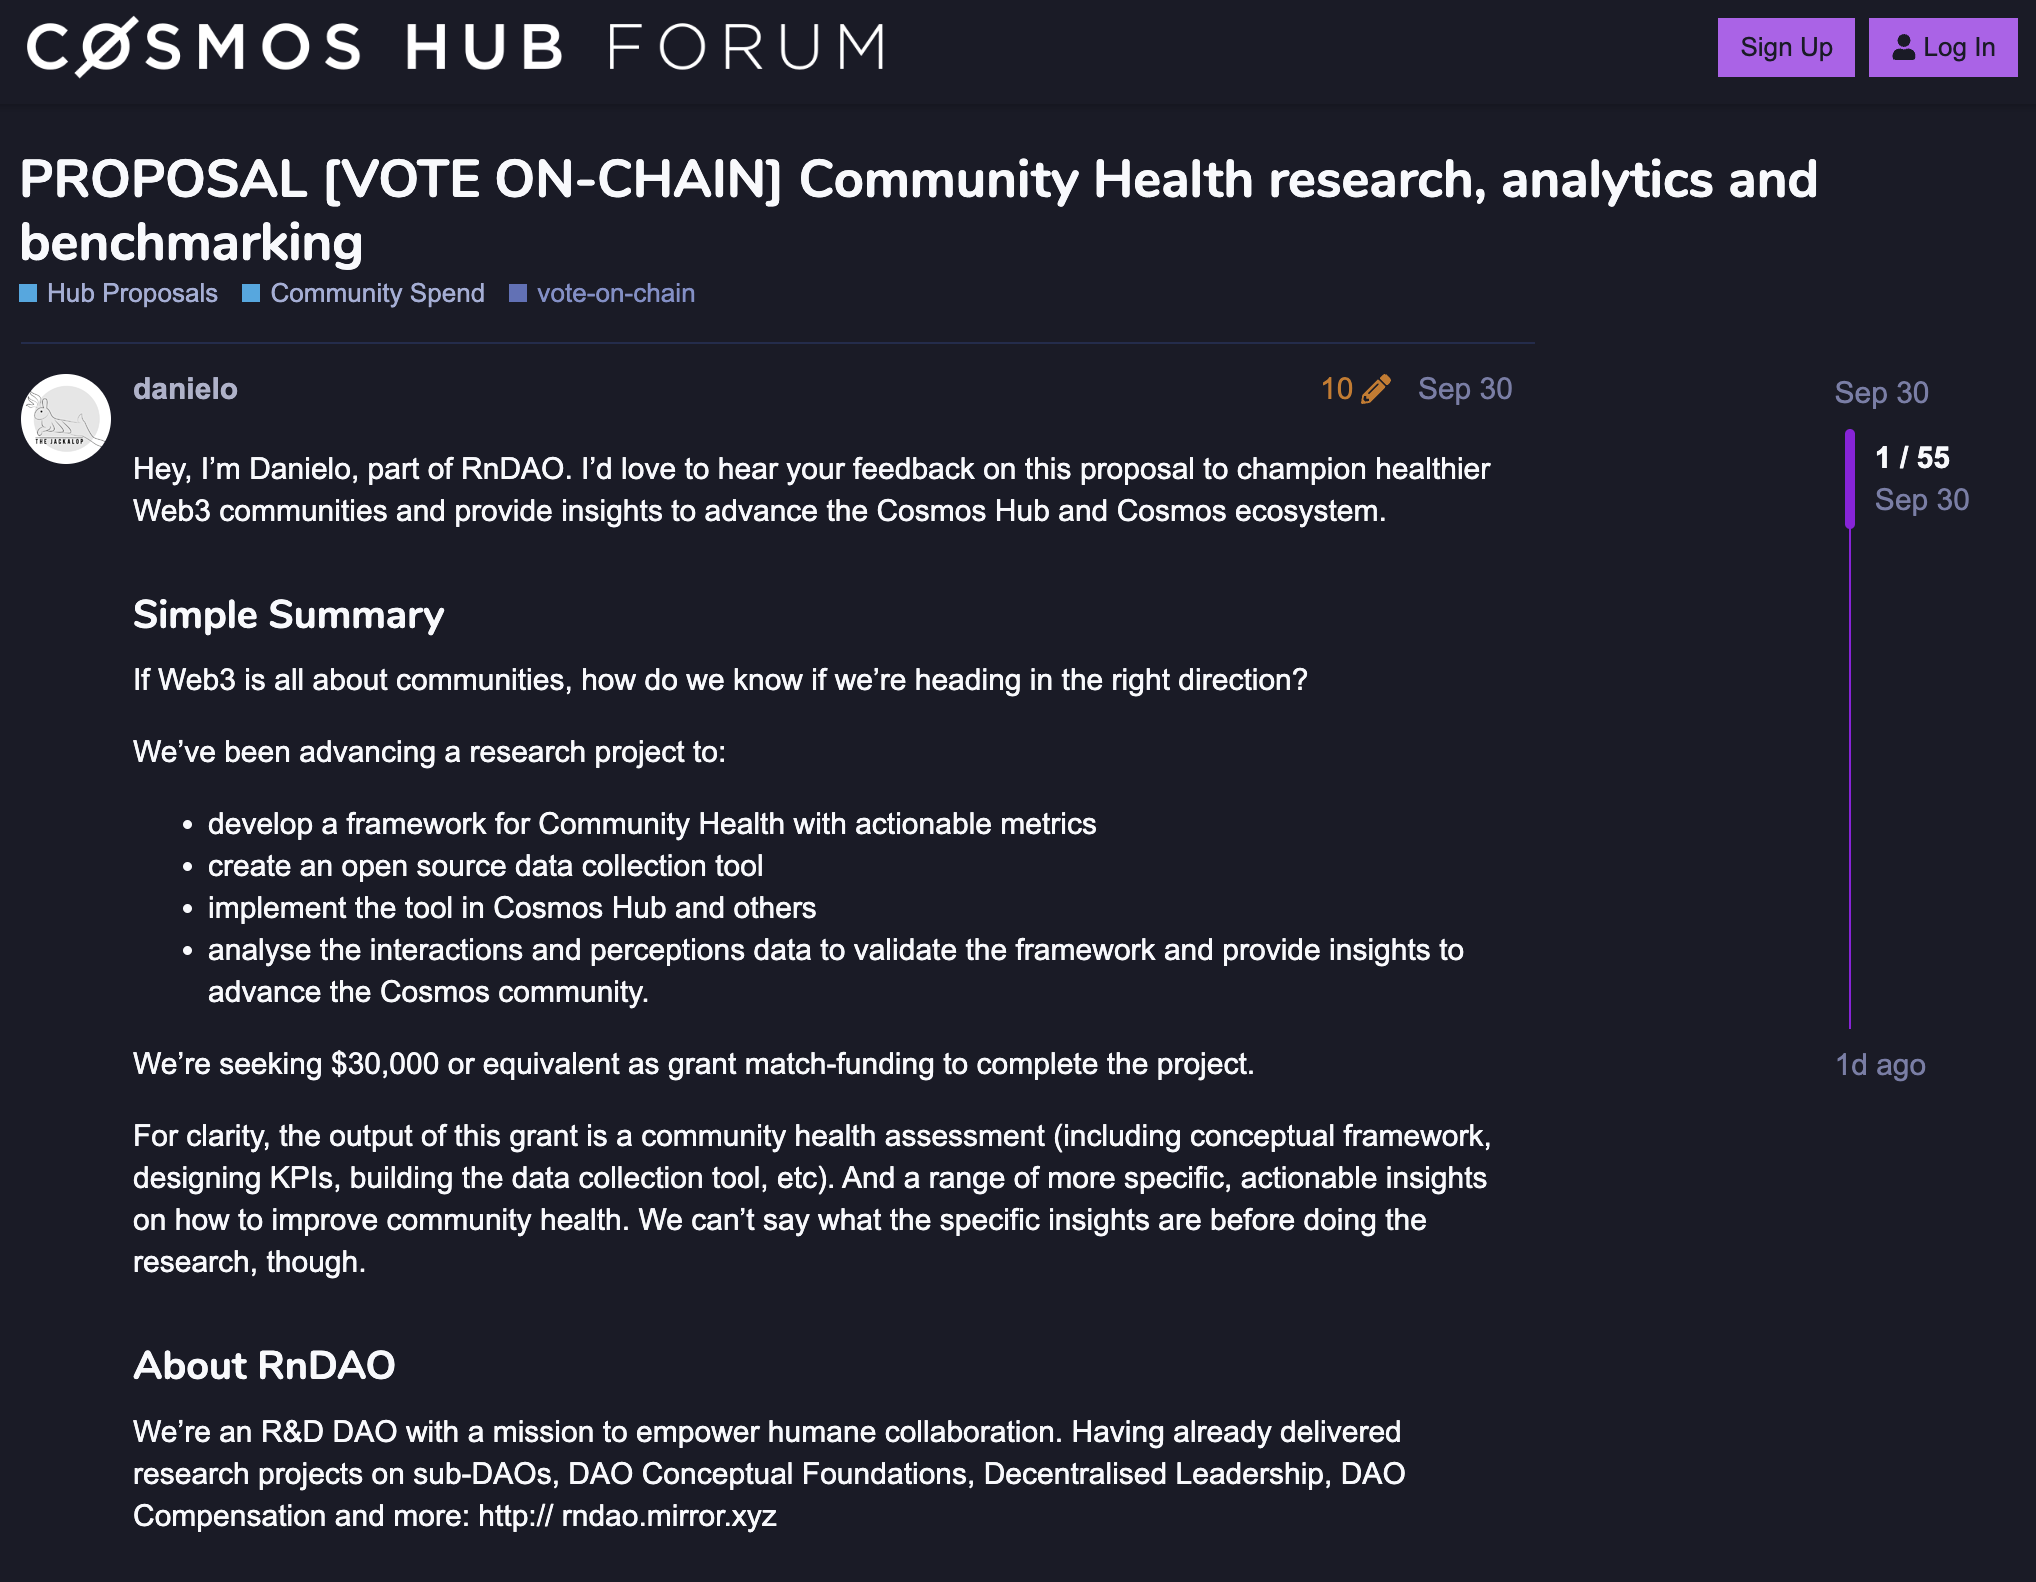 Community Health research, analytics and benchmarking